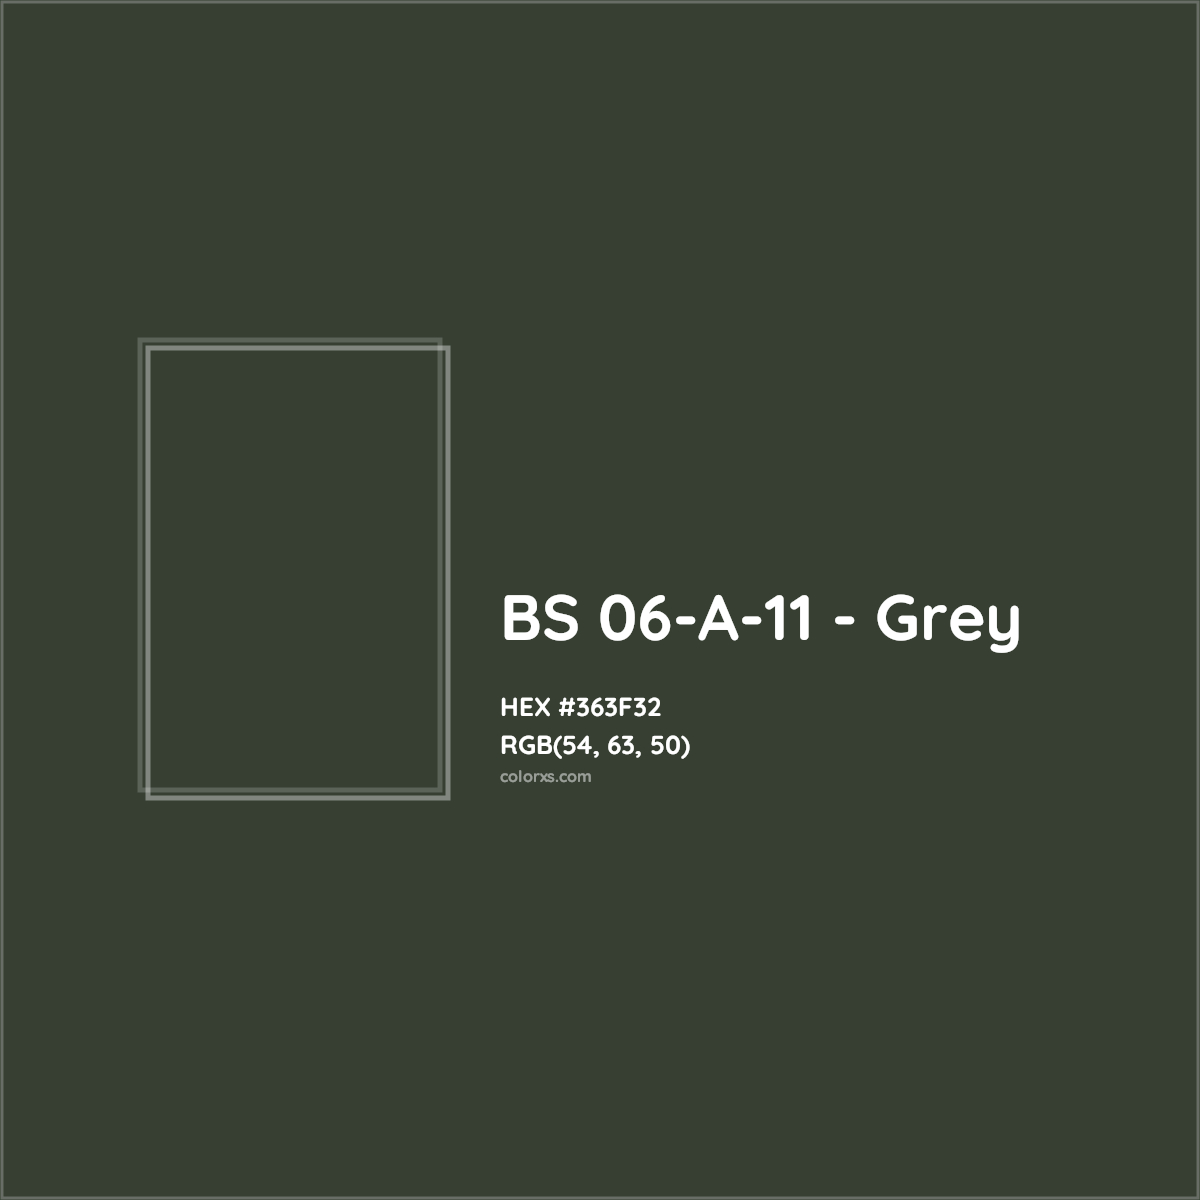 HEX #363F32 BS 06-A-11 - Grey CMS British Standard 4800 - Color Code